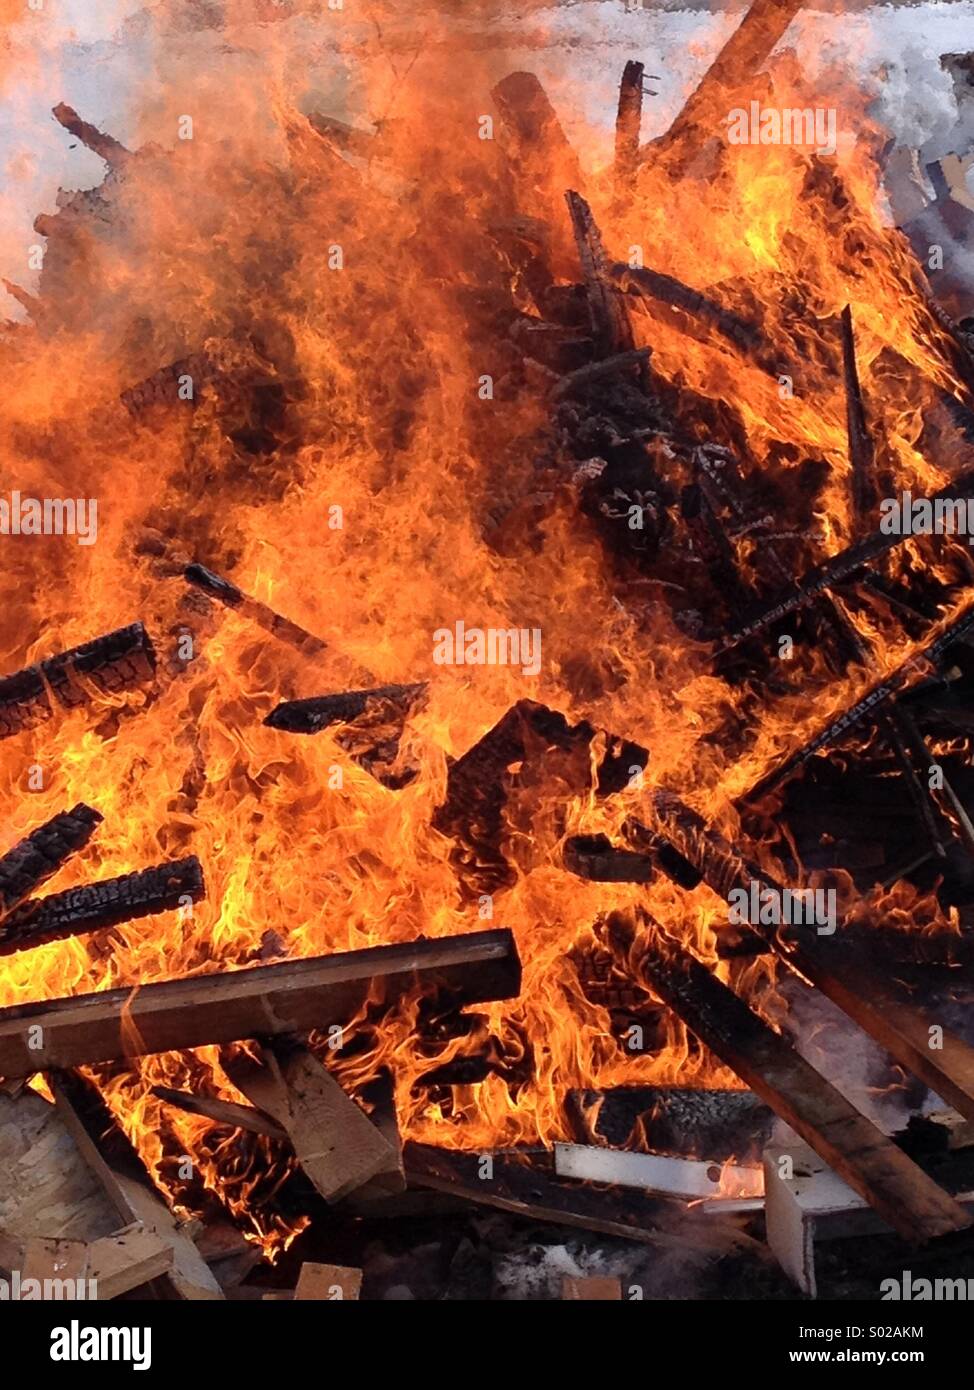 Burn pile of waste construction material Stock Photo